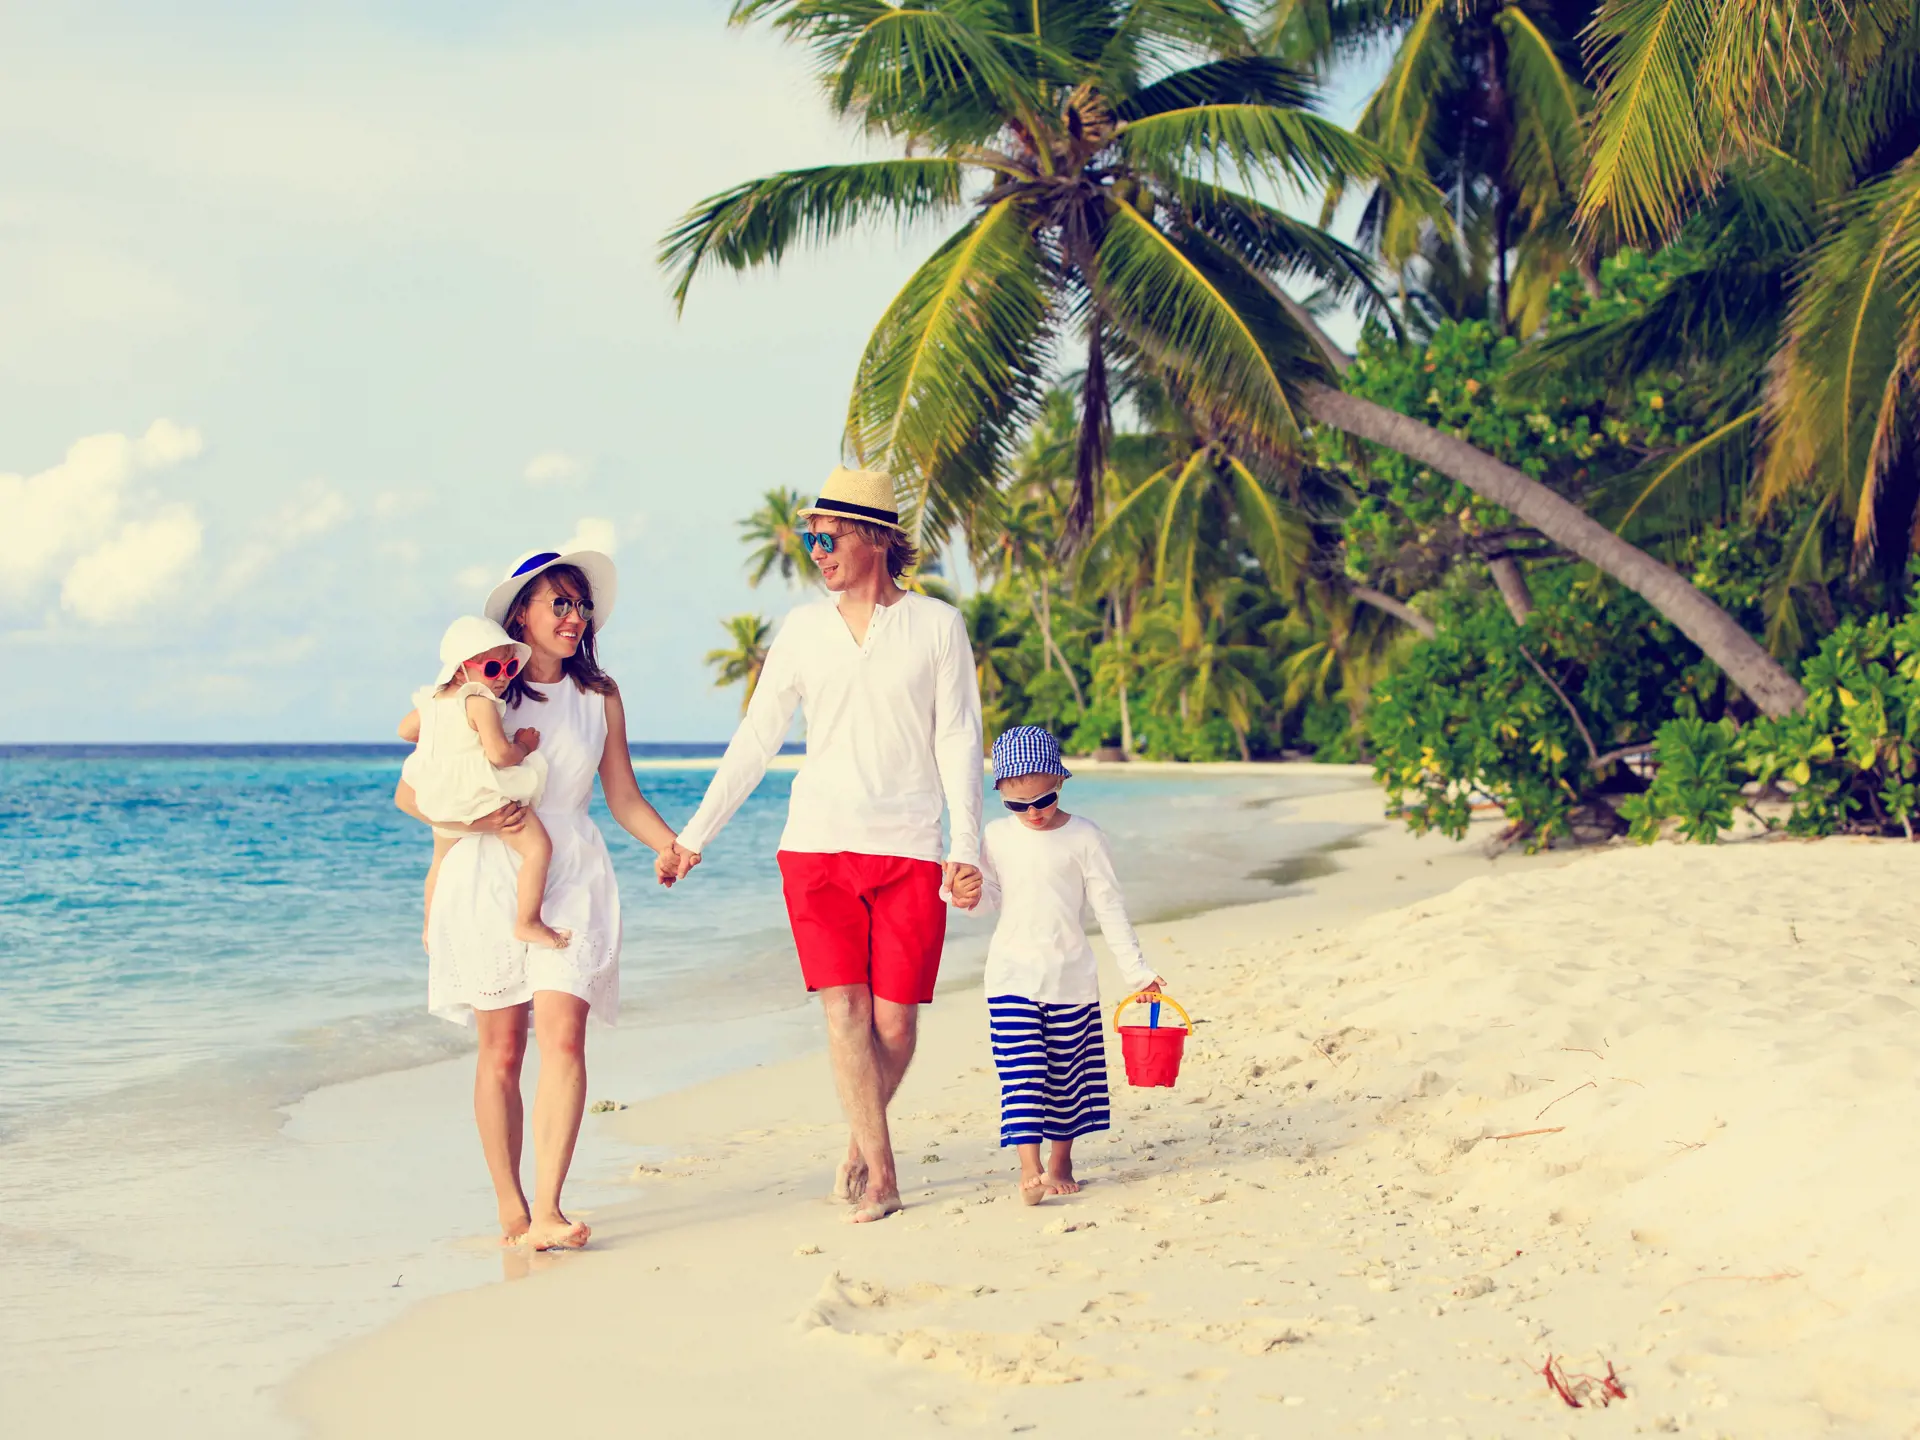 shutterstock_354414668 Young family with two kids walking at tropical beach, family beach vacation.jpg